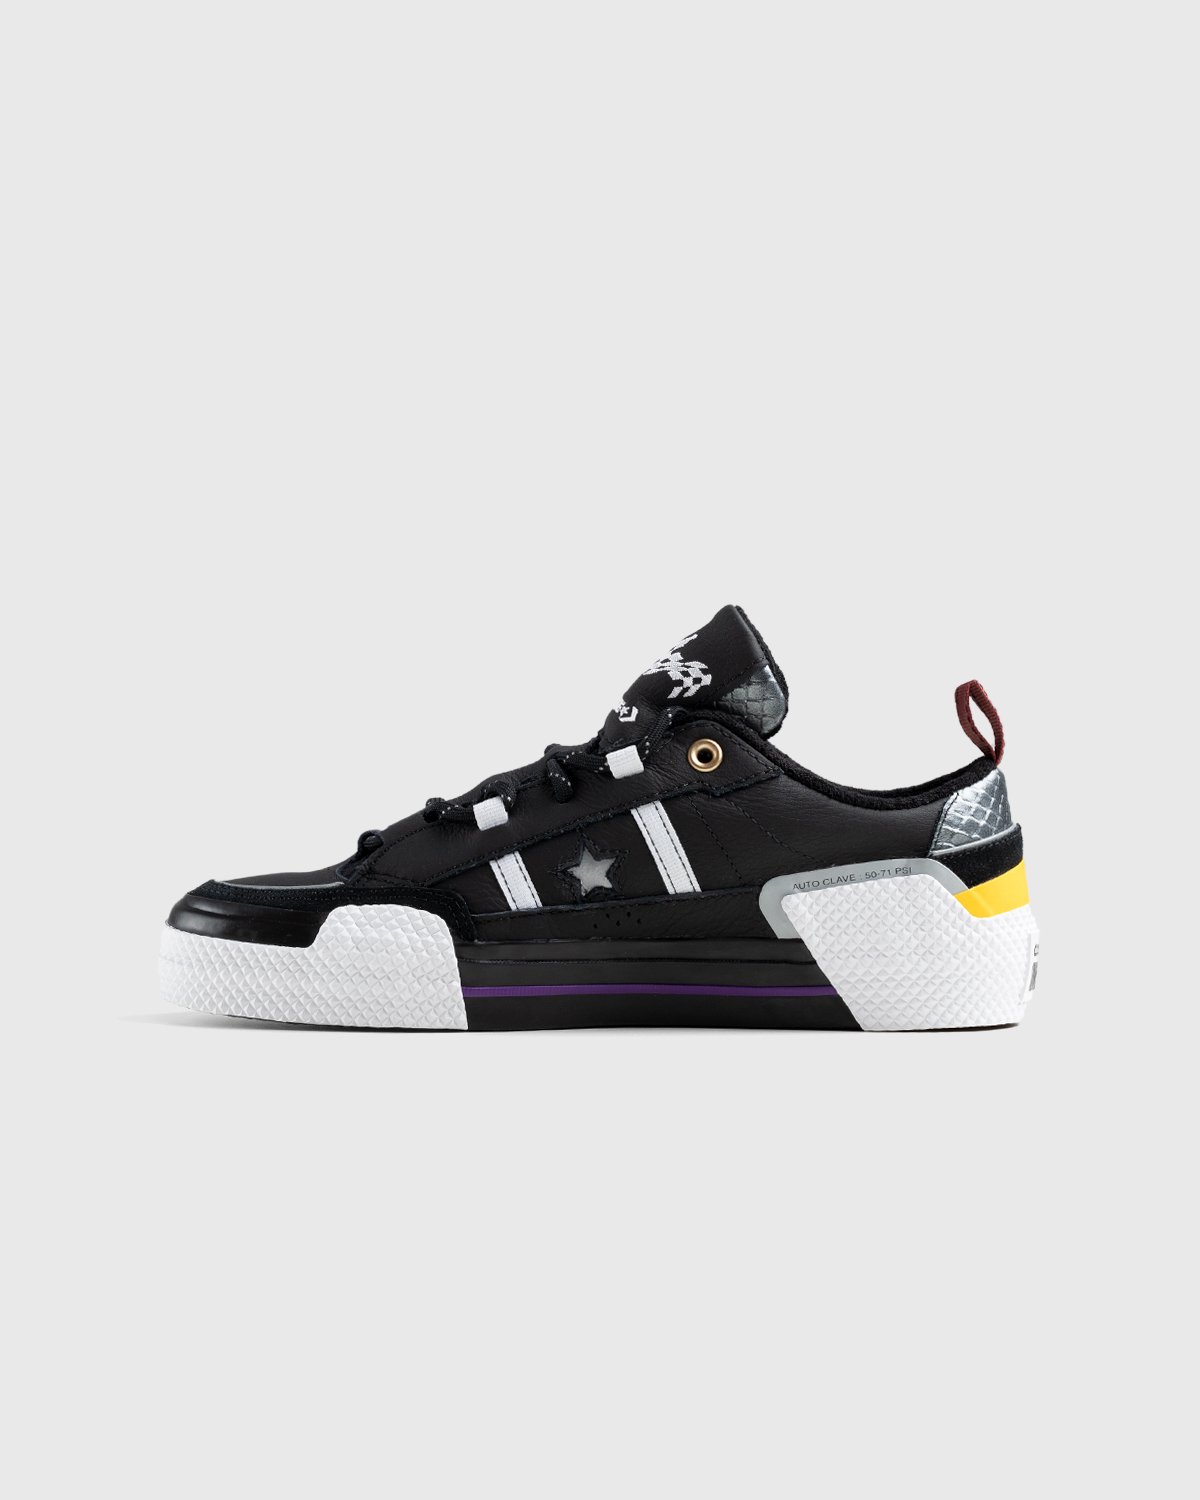 Converse x IBN Japser - One Star Ox Black/White/Spectra Yellow - Footwear - Black - Image 2